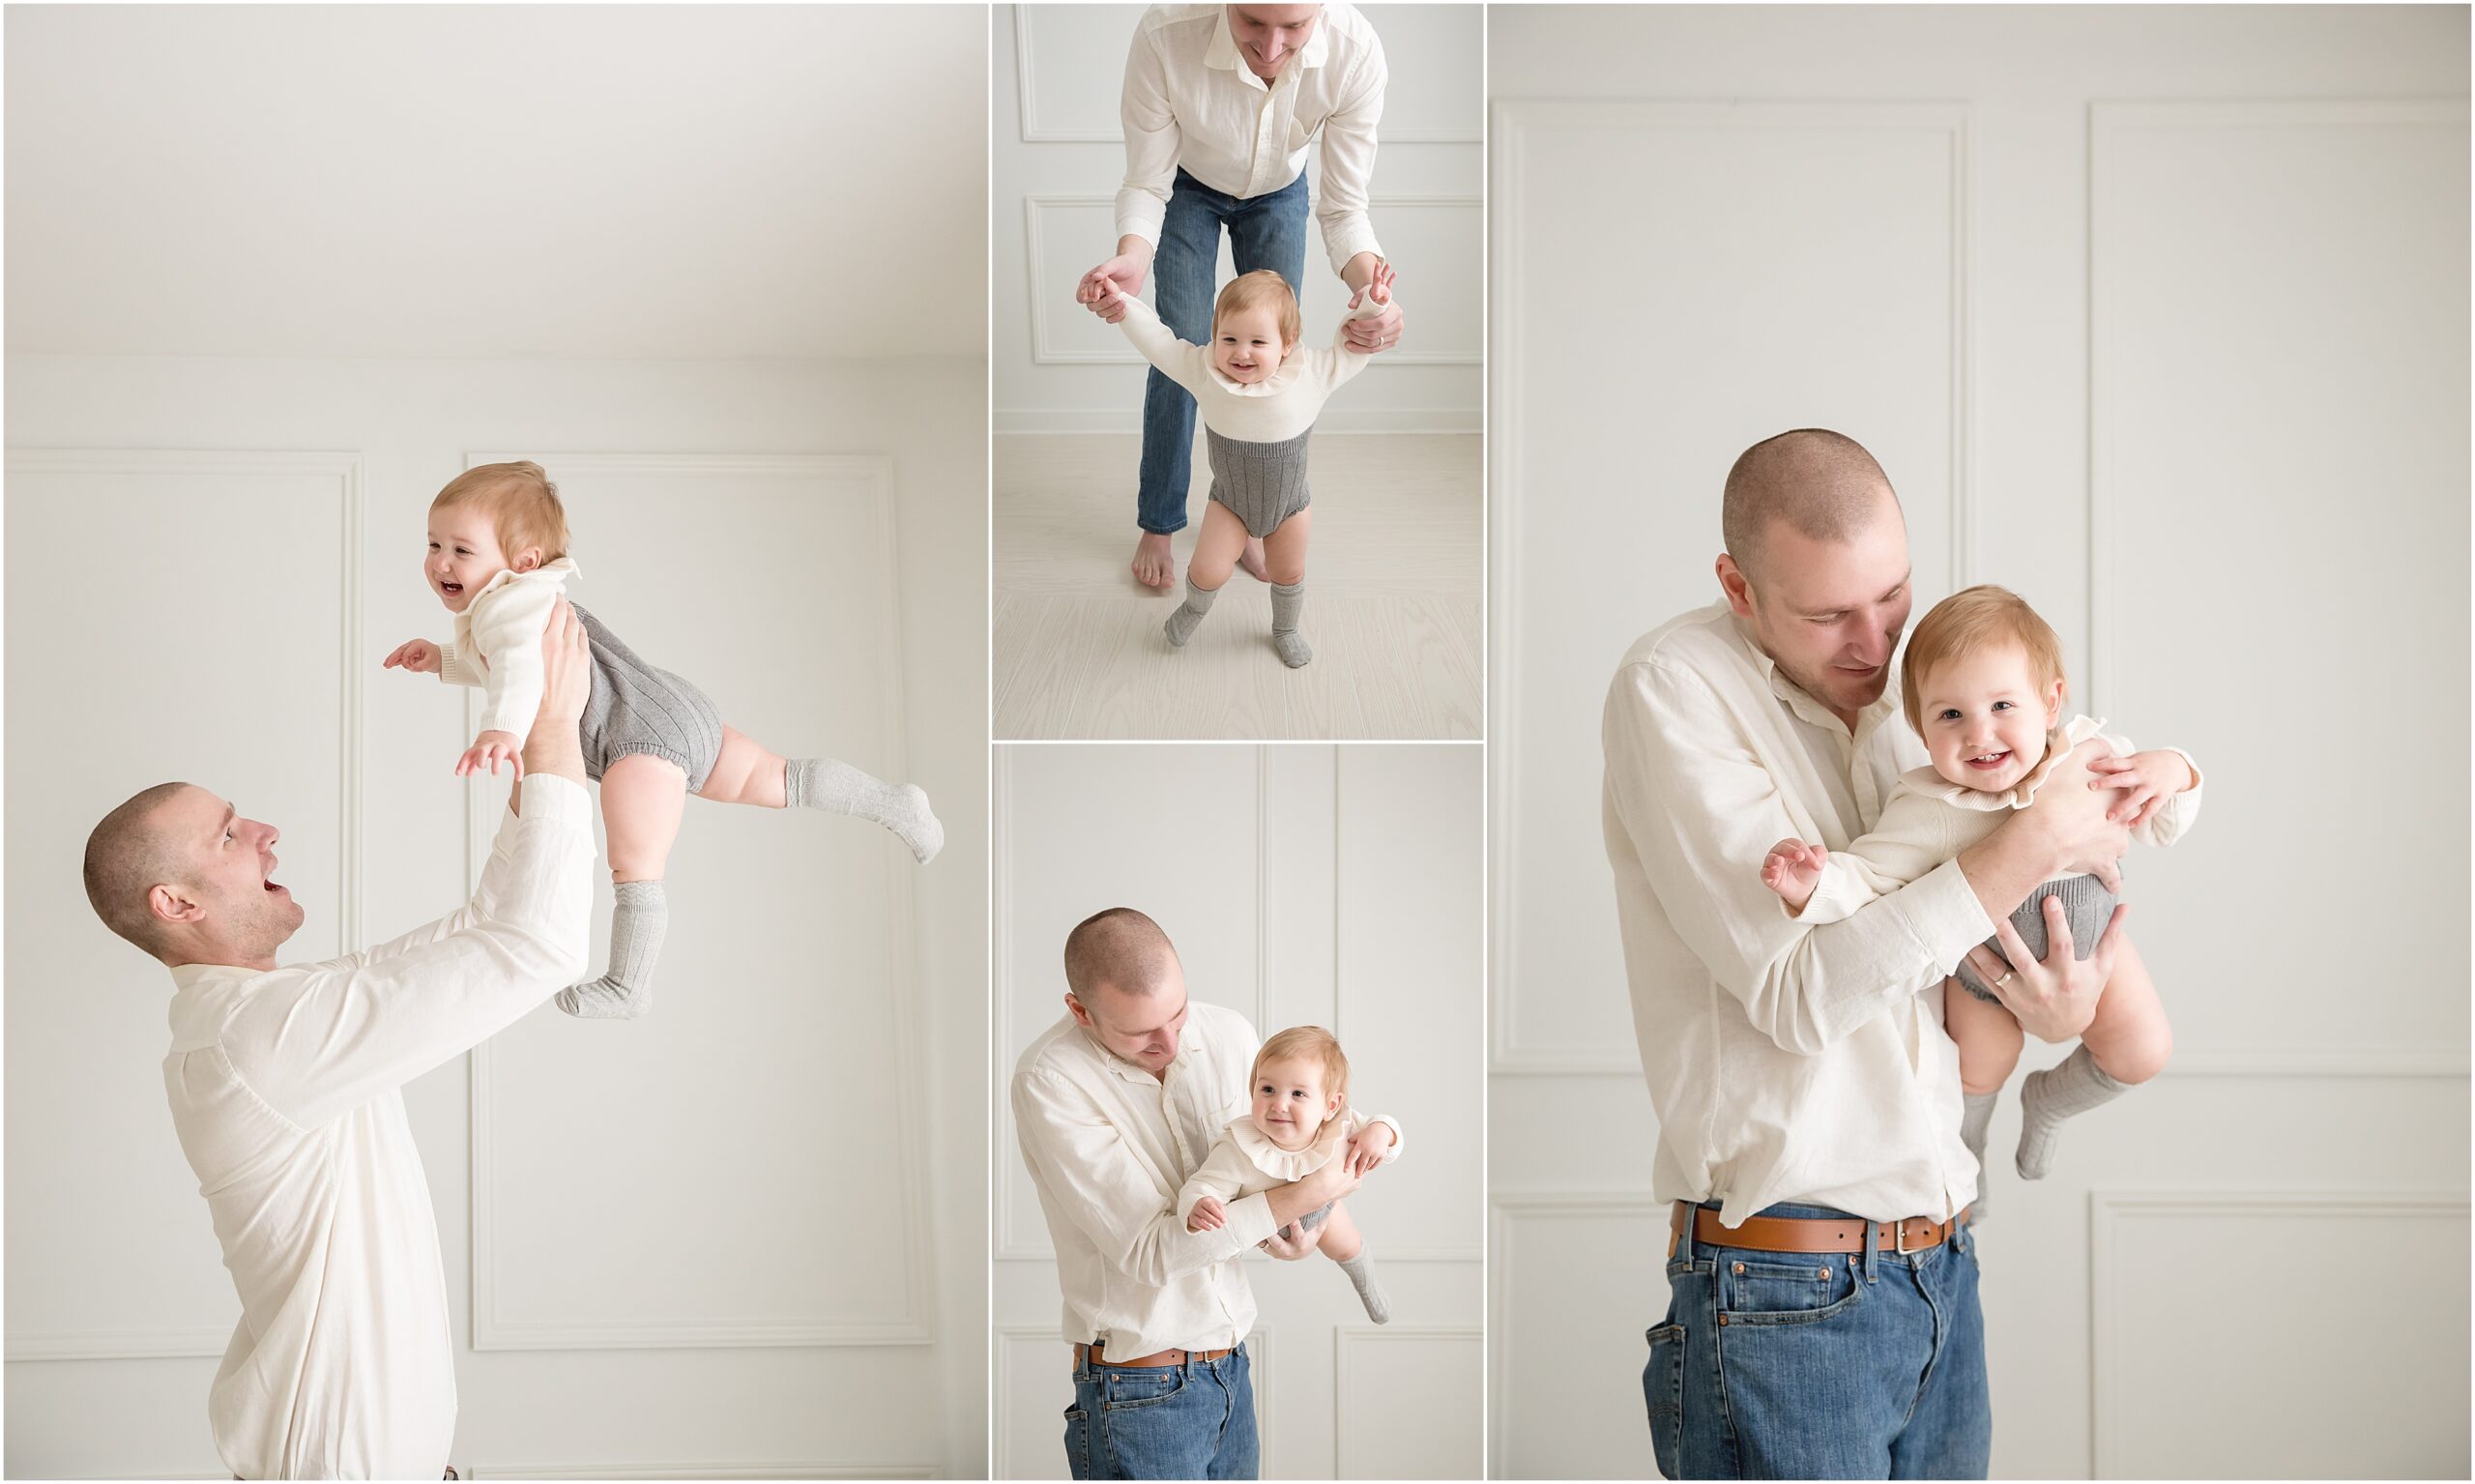 Collage of photos of a dad playing with his baby girl, including holding her hands while she walks and flying her around like an airplane